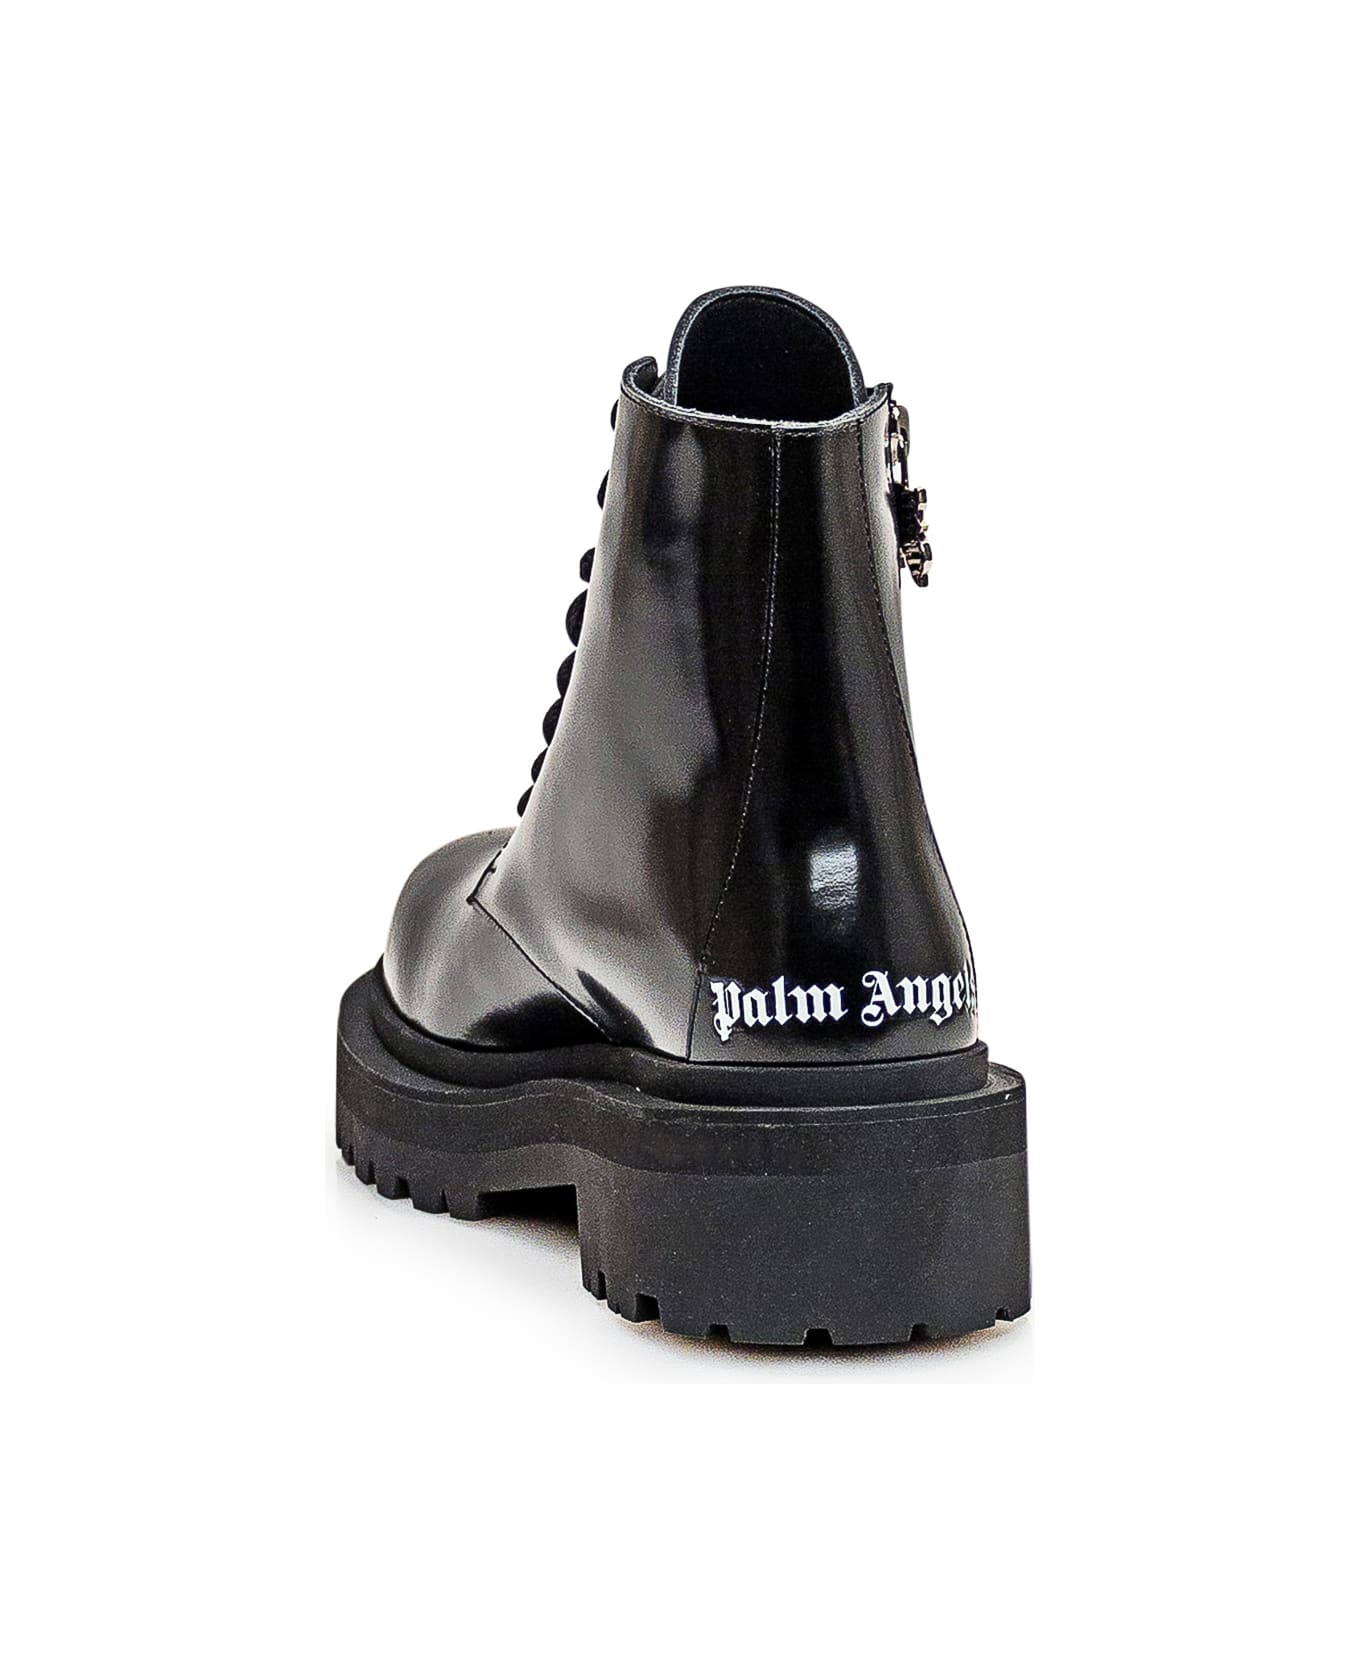 Palm Angels Combat Boots In Black Leather - Black